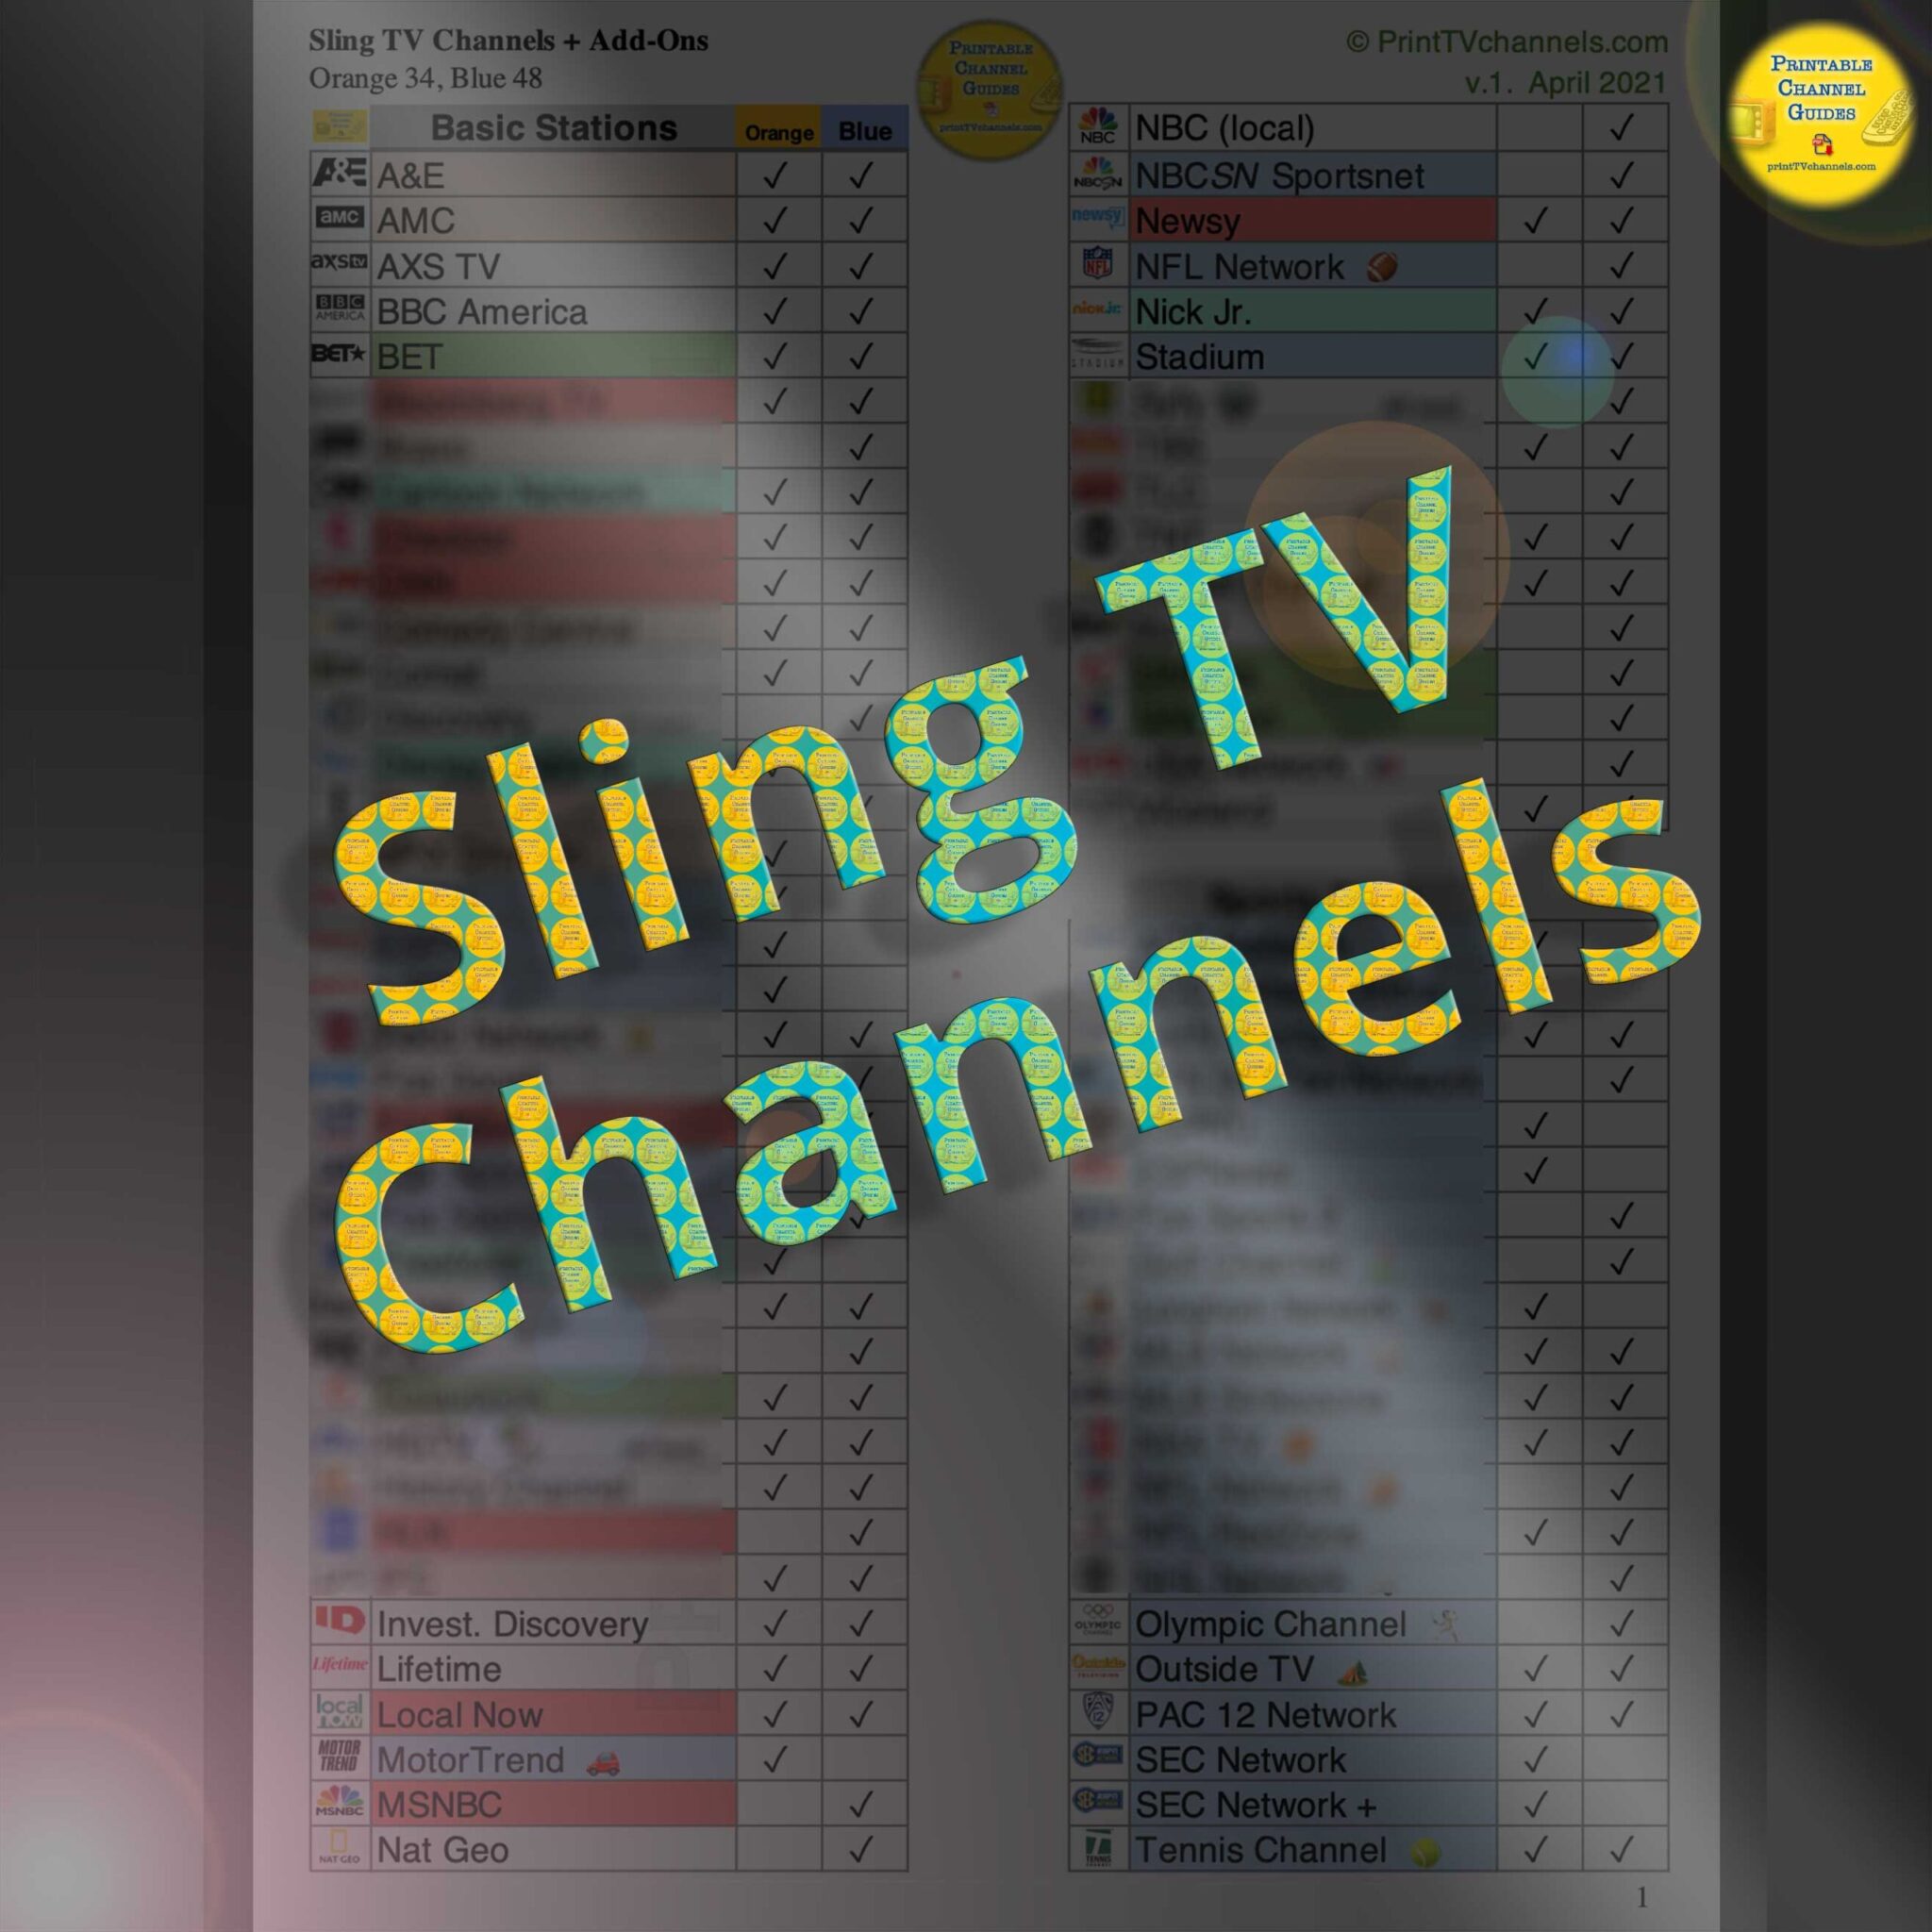 Sling TV Channel List Compare Orange and Blue Packages by Channel